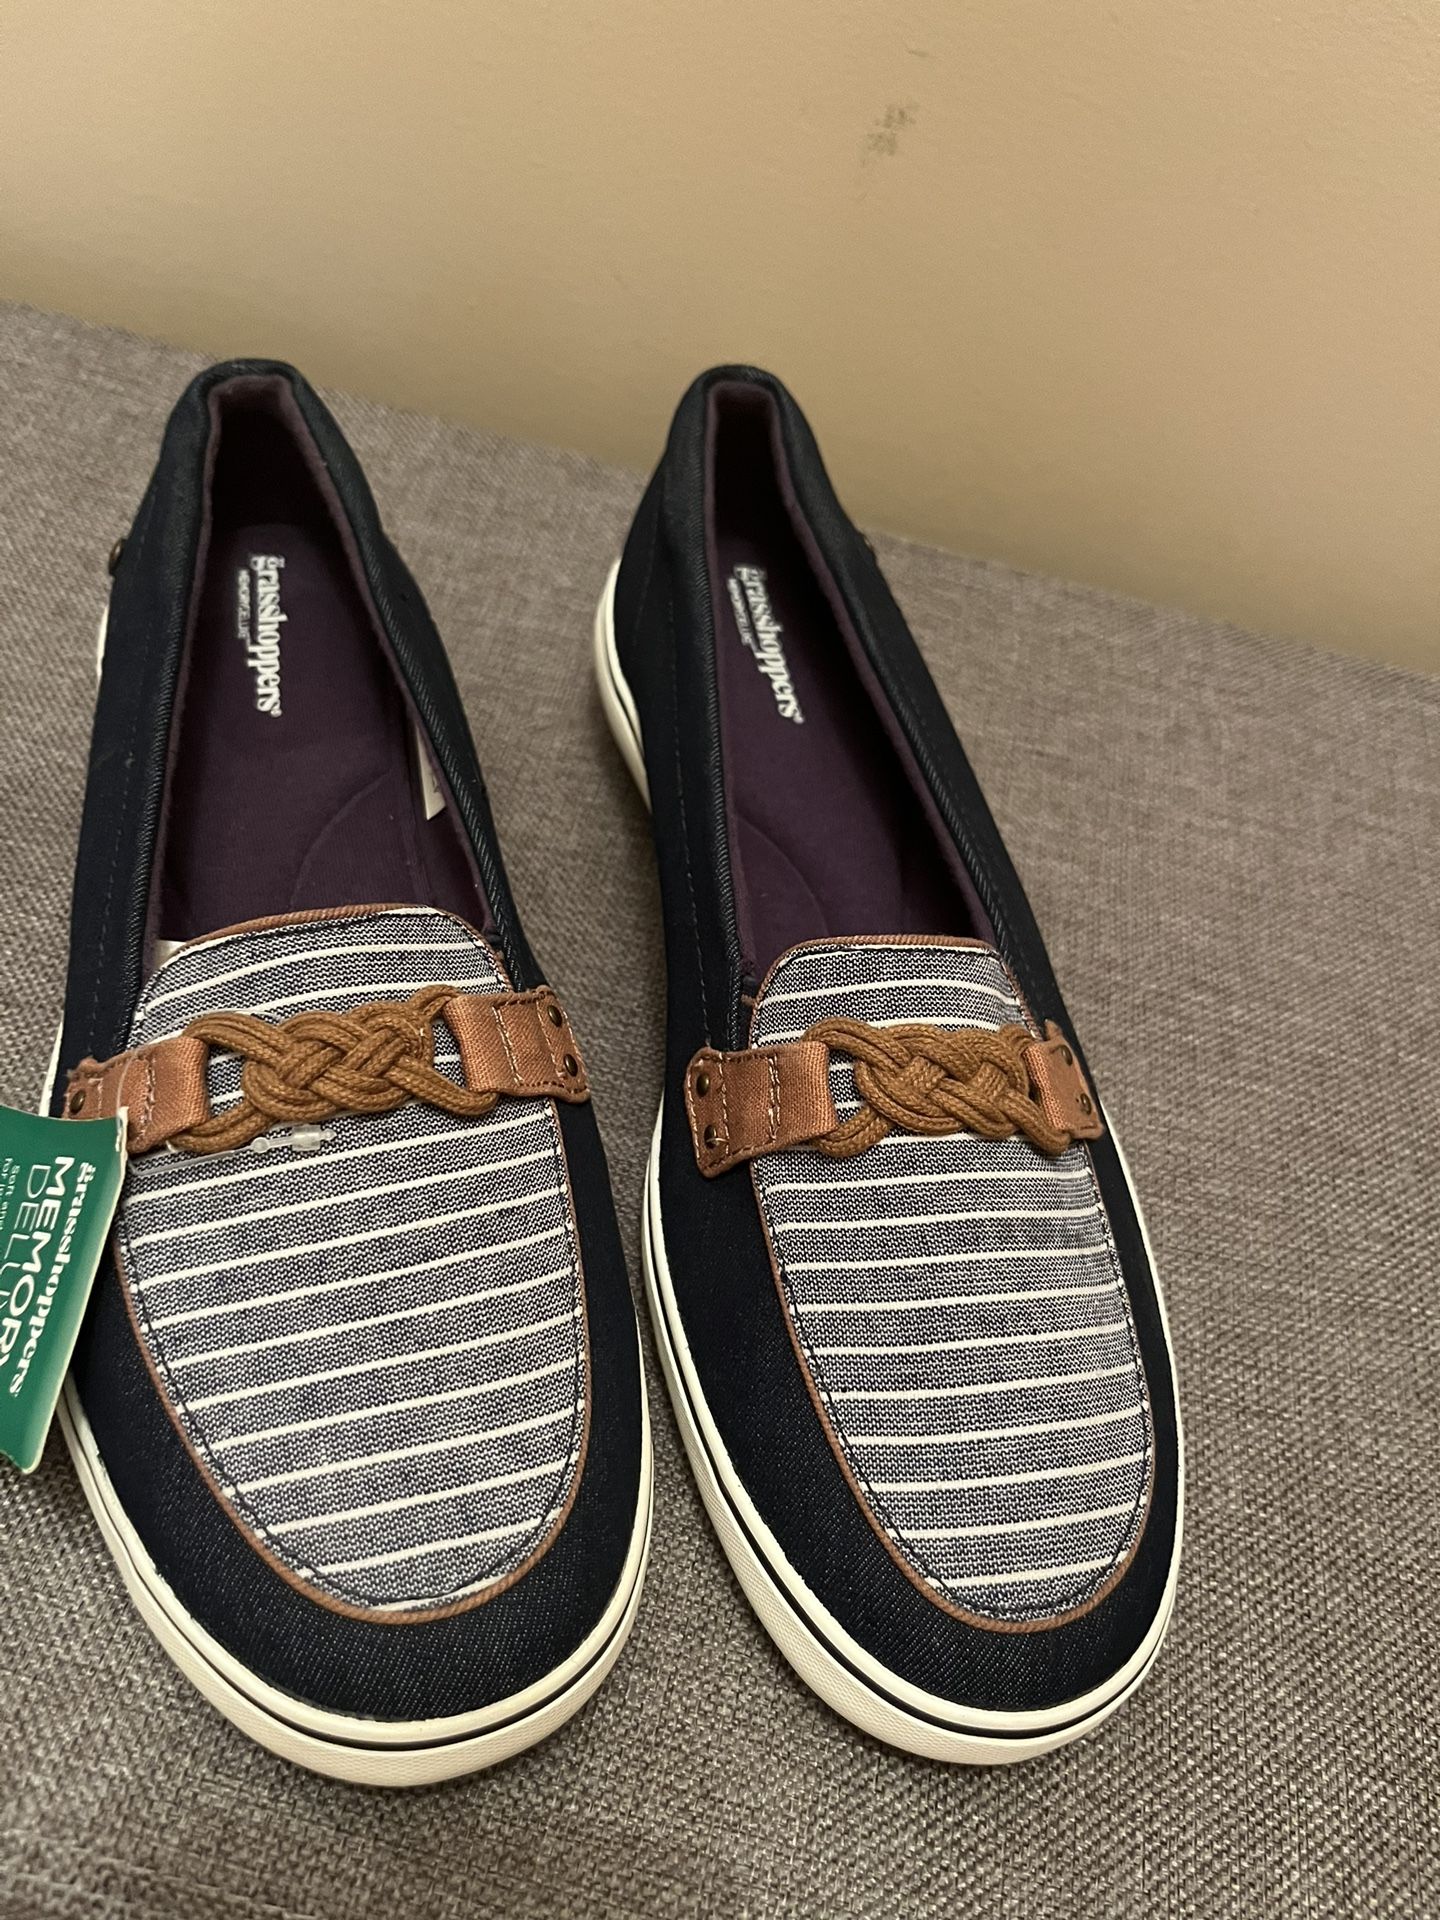  Grasshoppers Keds Windsor Canvas Loafer Navy/tan Memory Deluxe. US 9.5 new 